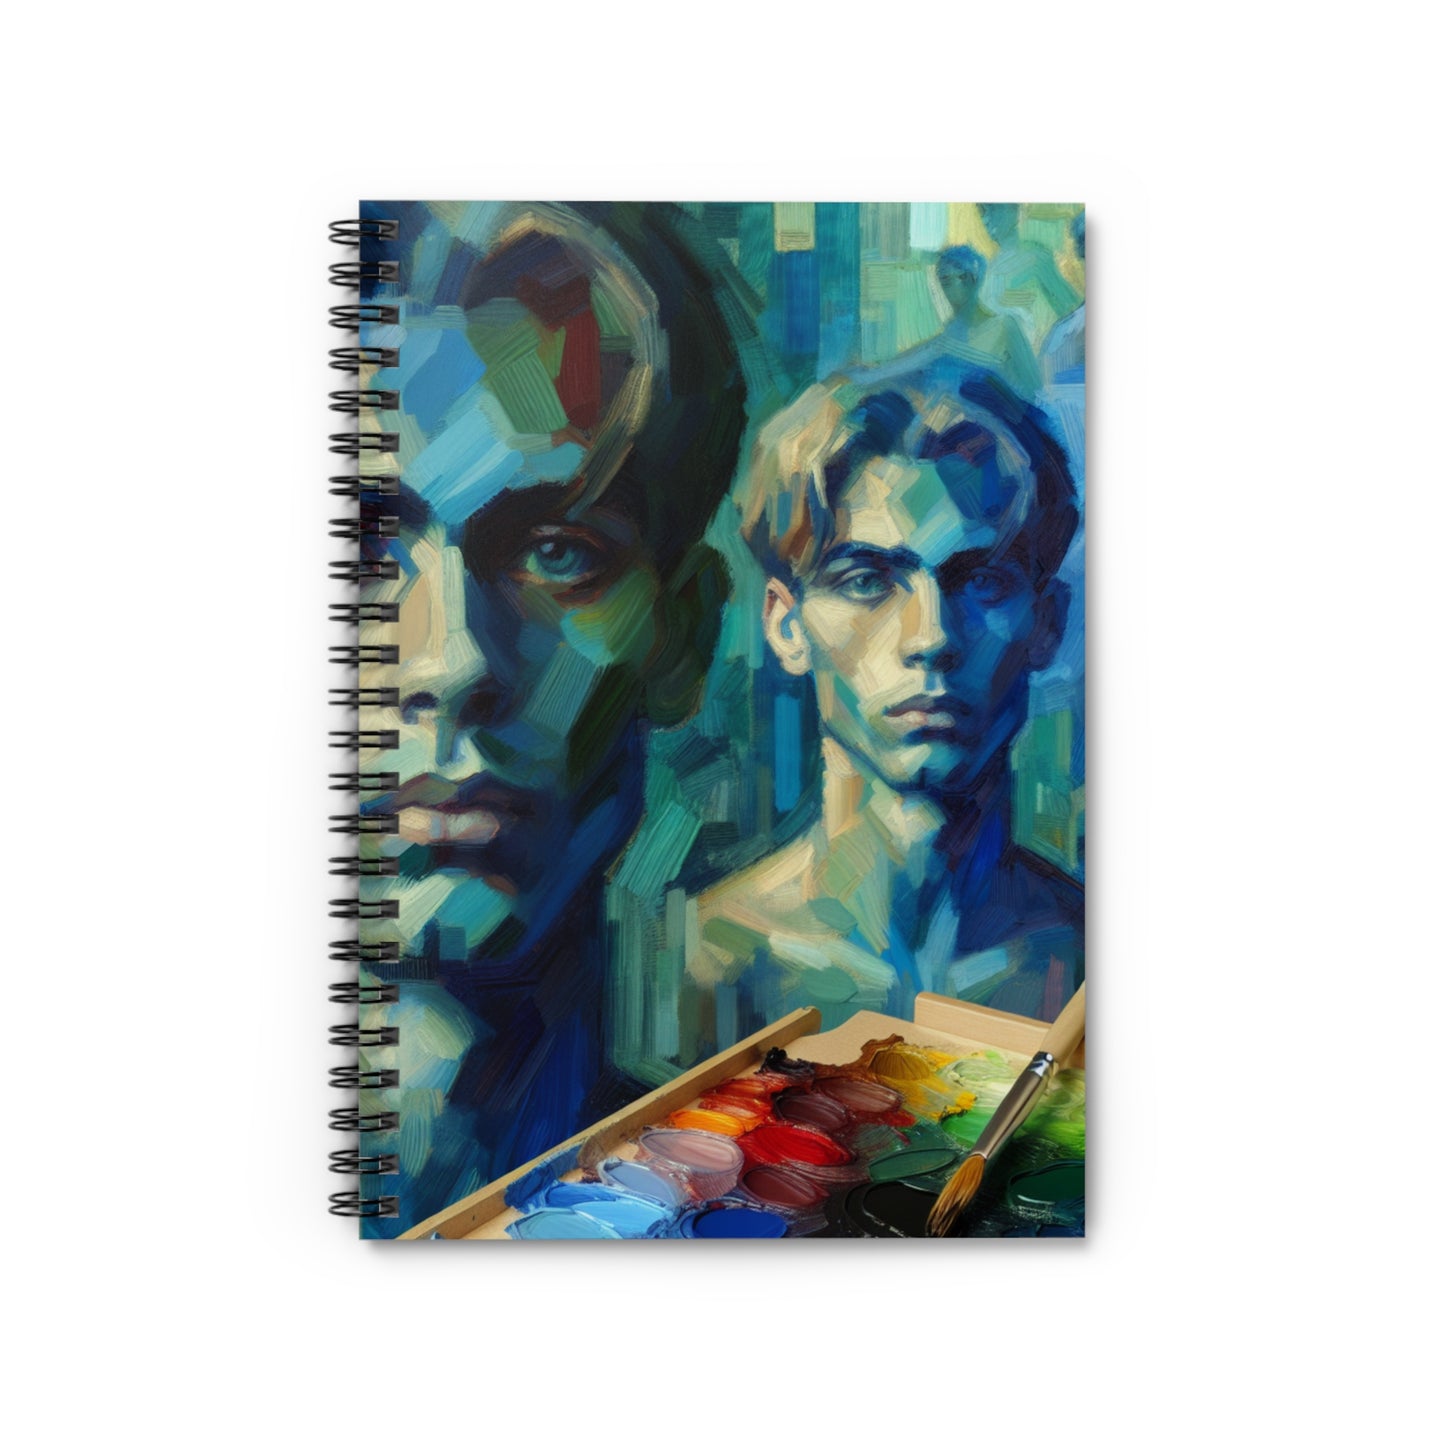 "Soothing Gaze" - The Alien Spiral Notebook (Ruled Line) Expressionism Style